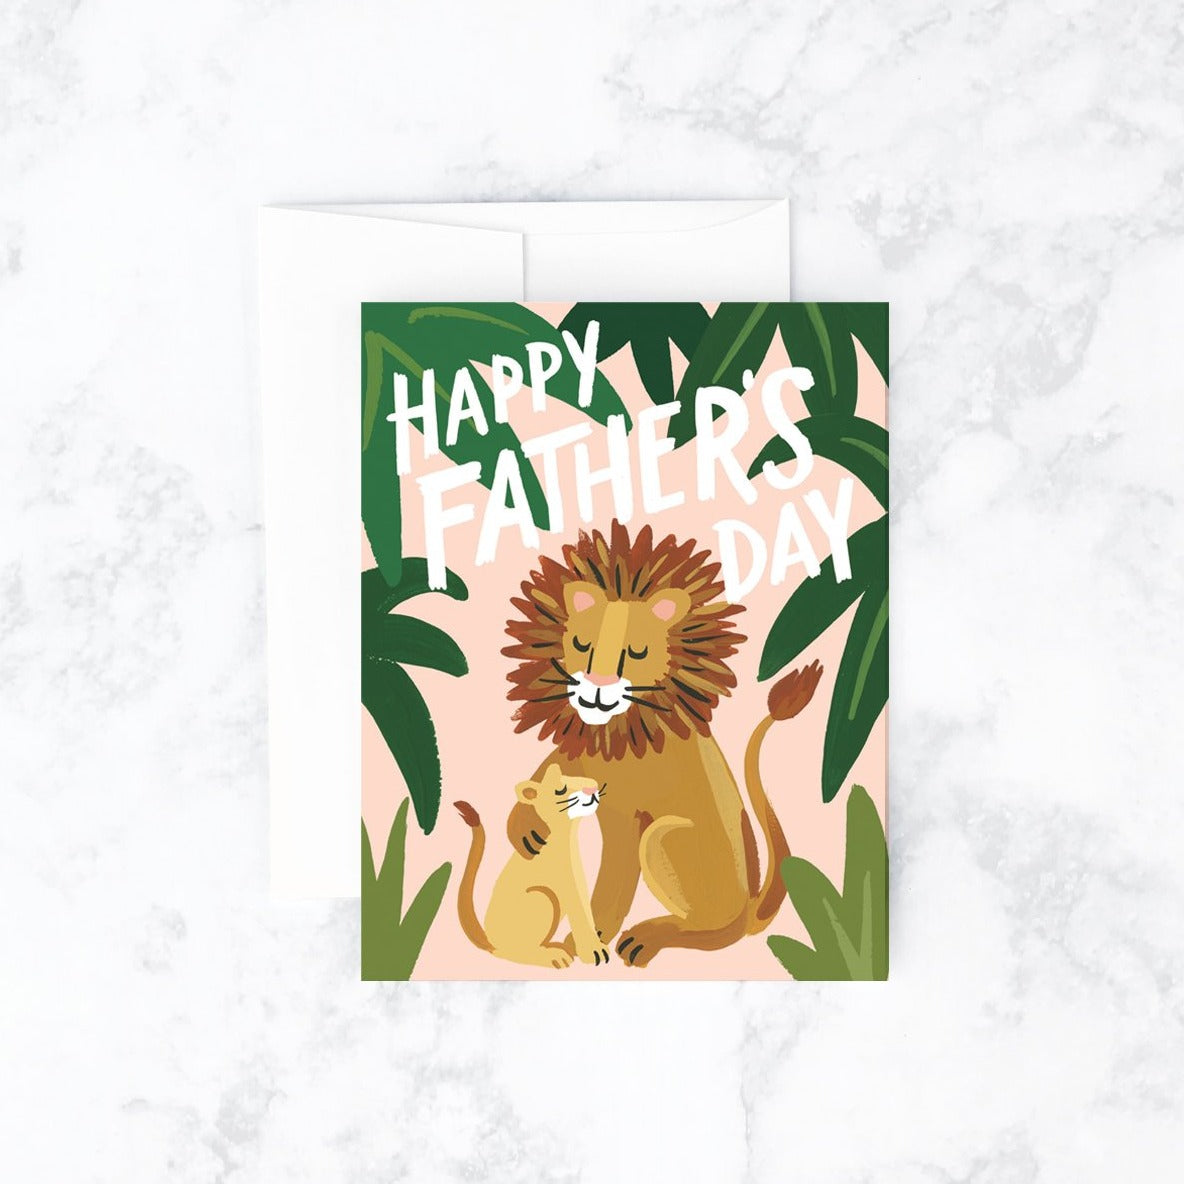 Lion Father's Day Card